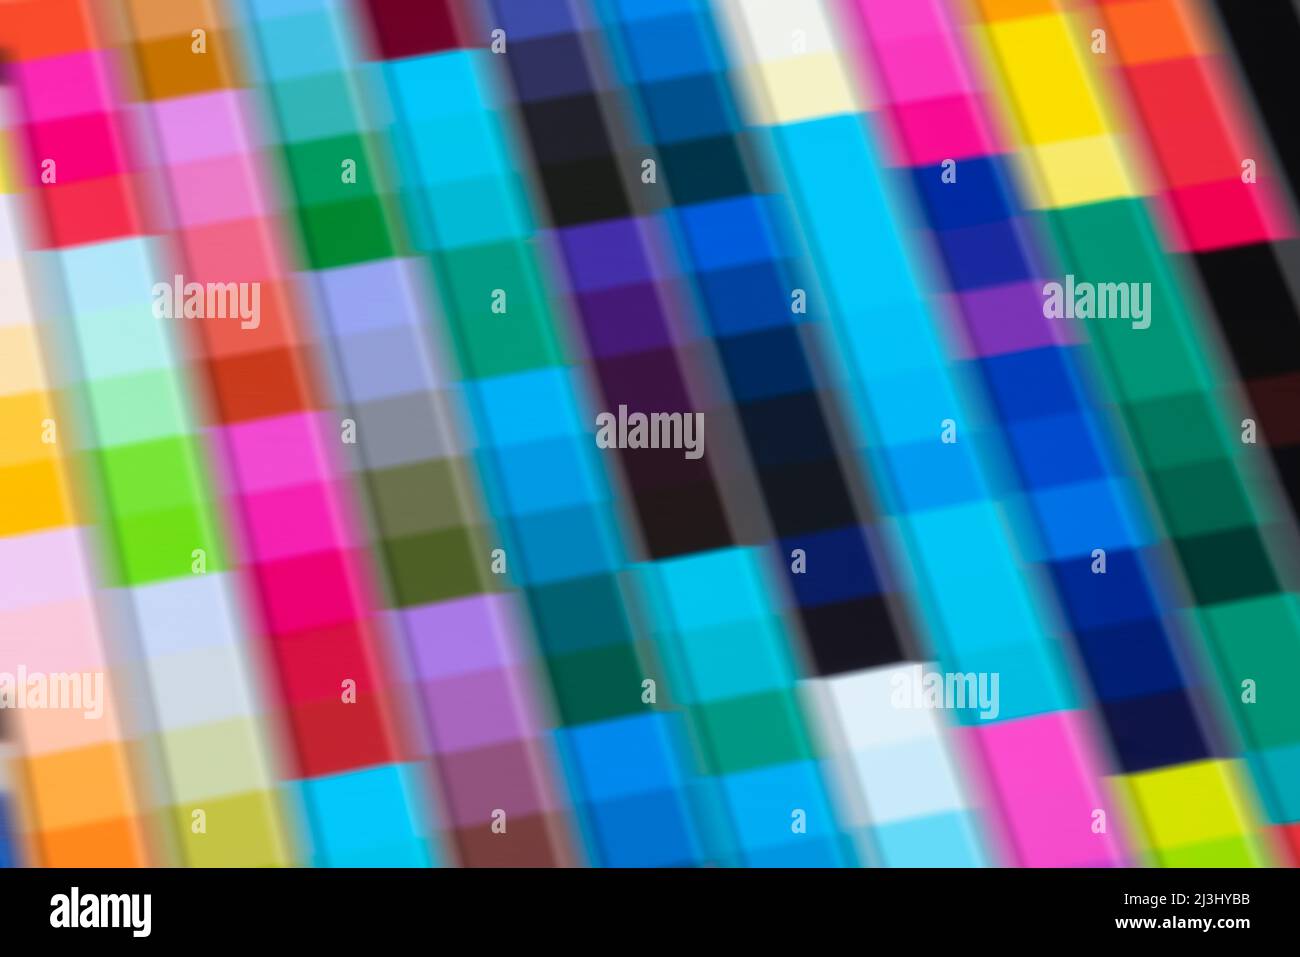 Blurred screen clour calibration chart  background Stock Photo